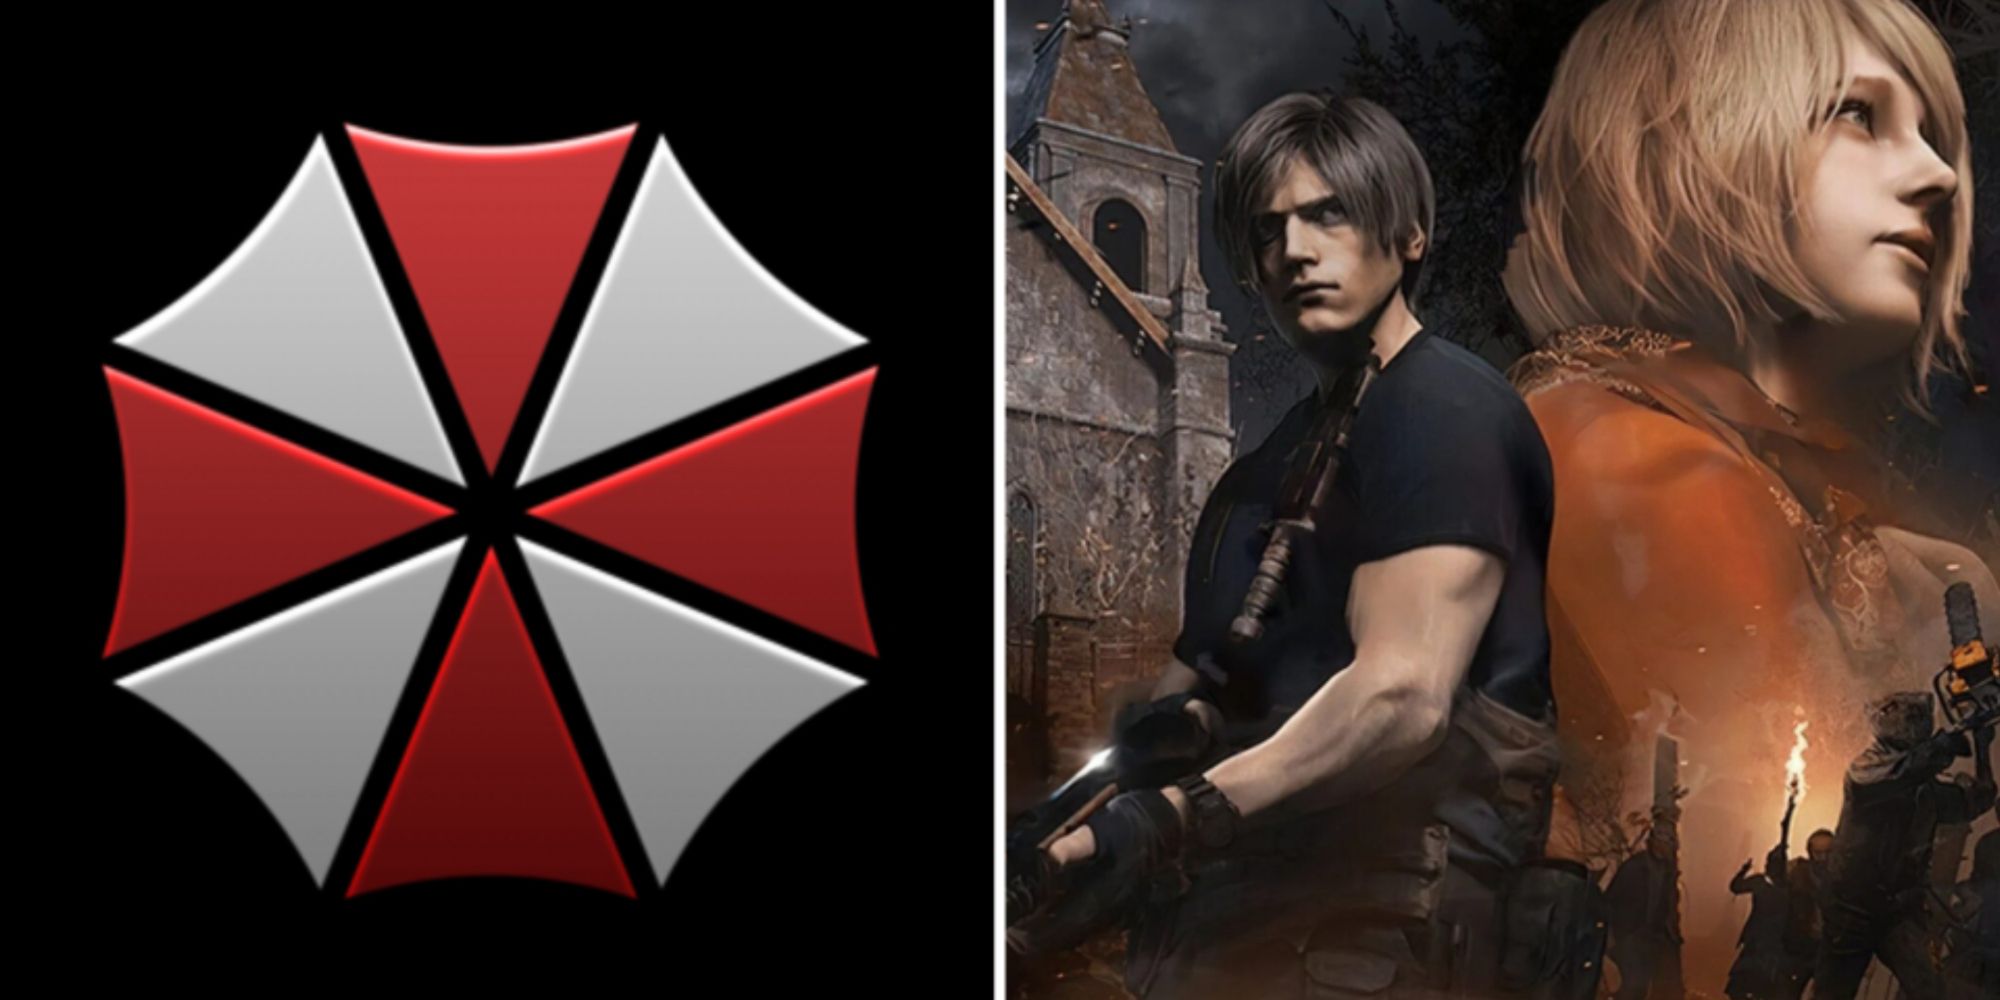 Data Mine Suggests Ada Wong To Return in Resident Evil 4